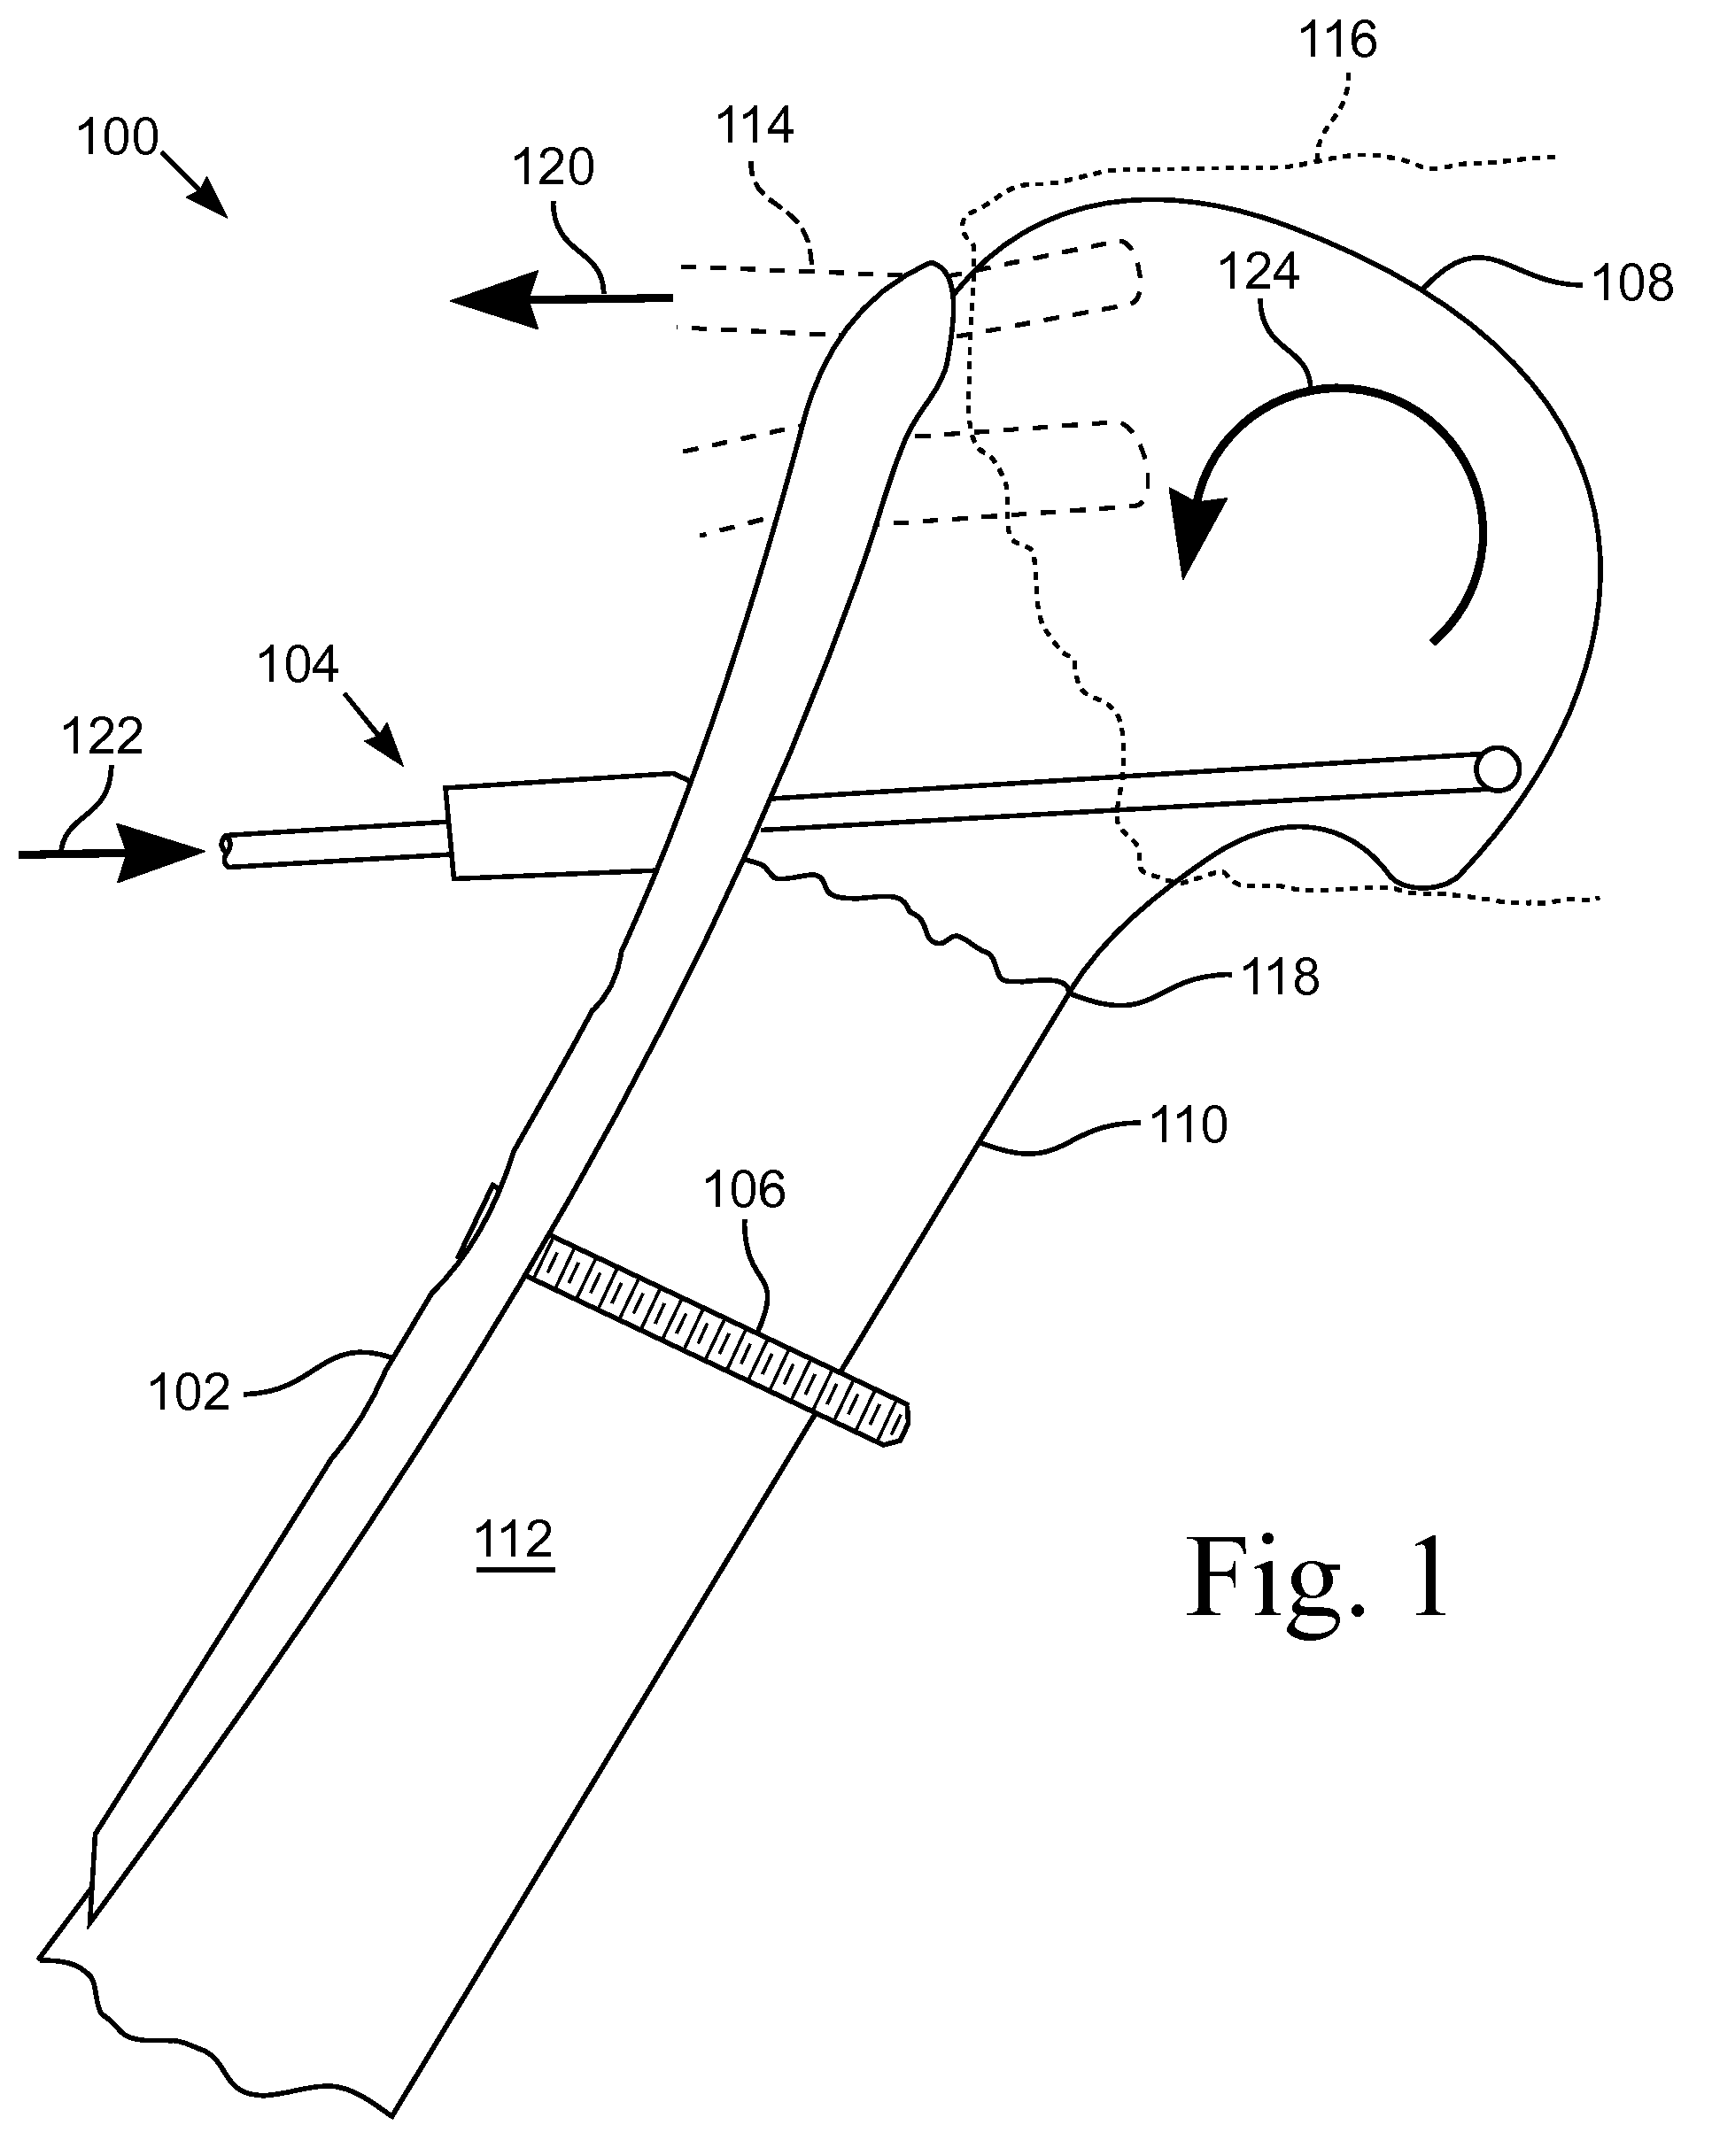 Proximal humeral fracture reduction and fixation device